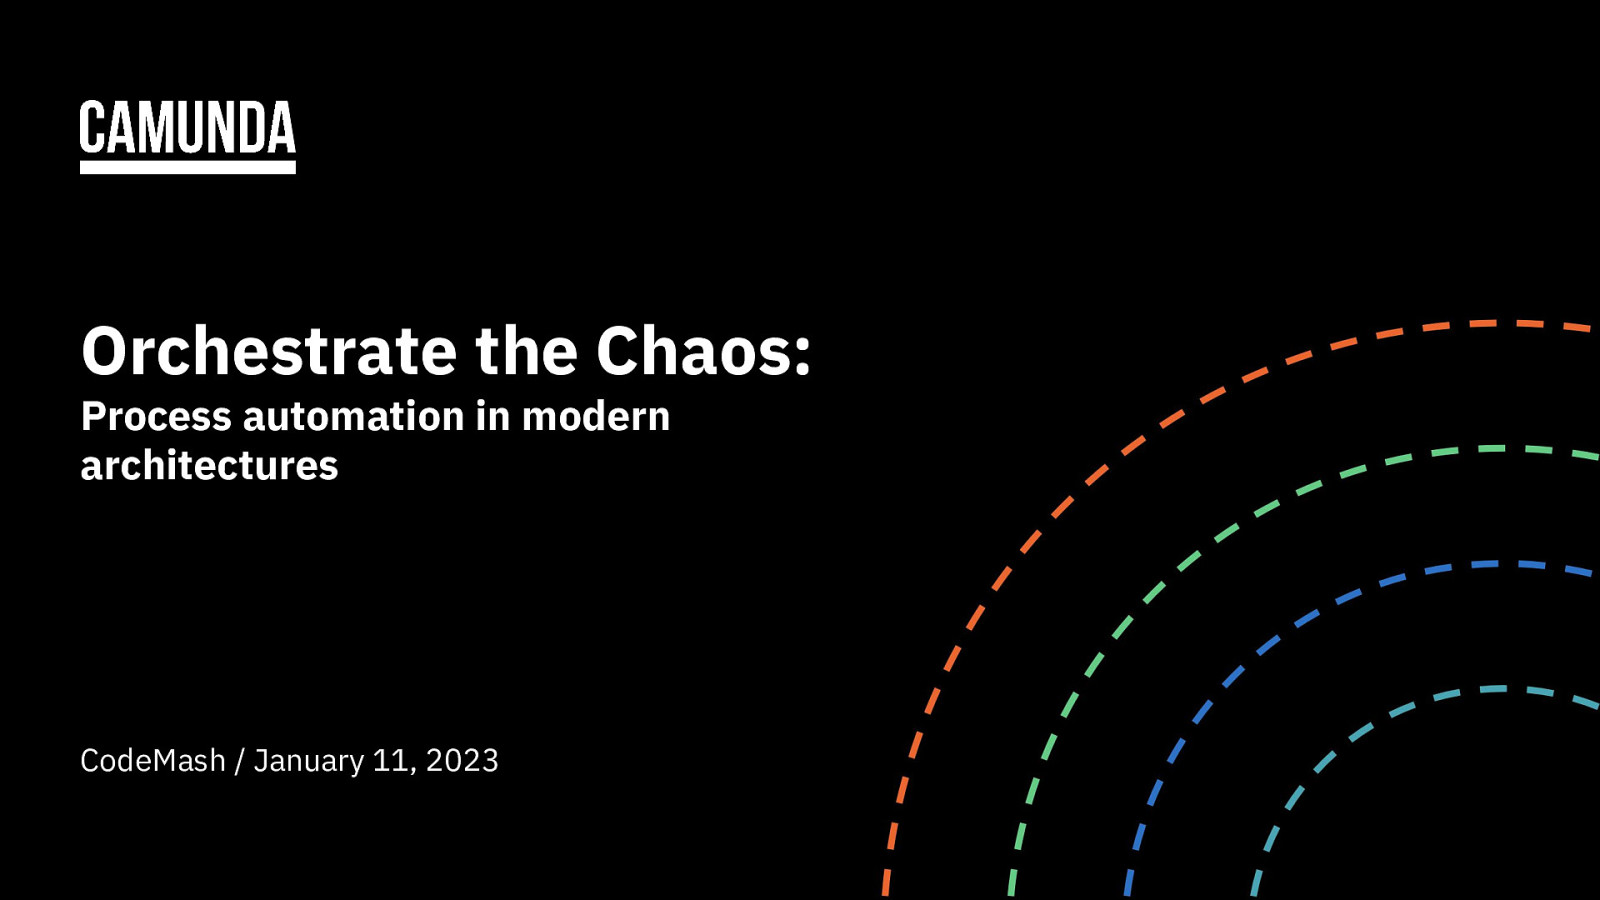 Orchestrate the Chaos: Process Automation in Modern Architectures